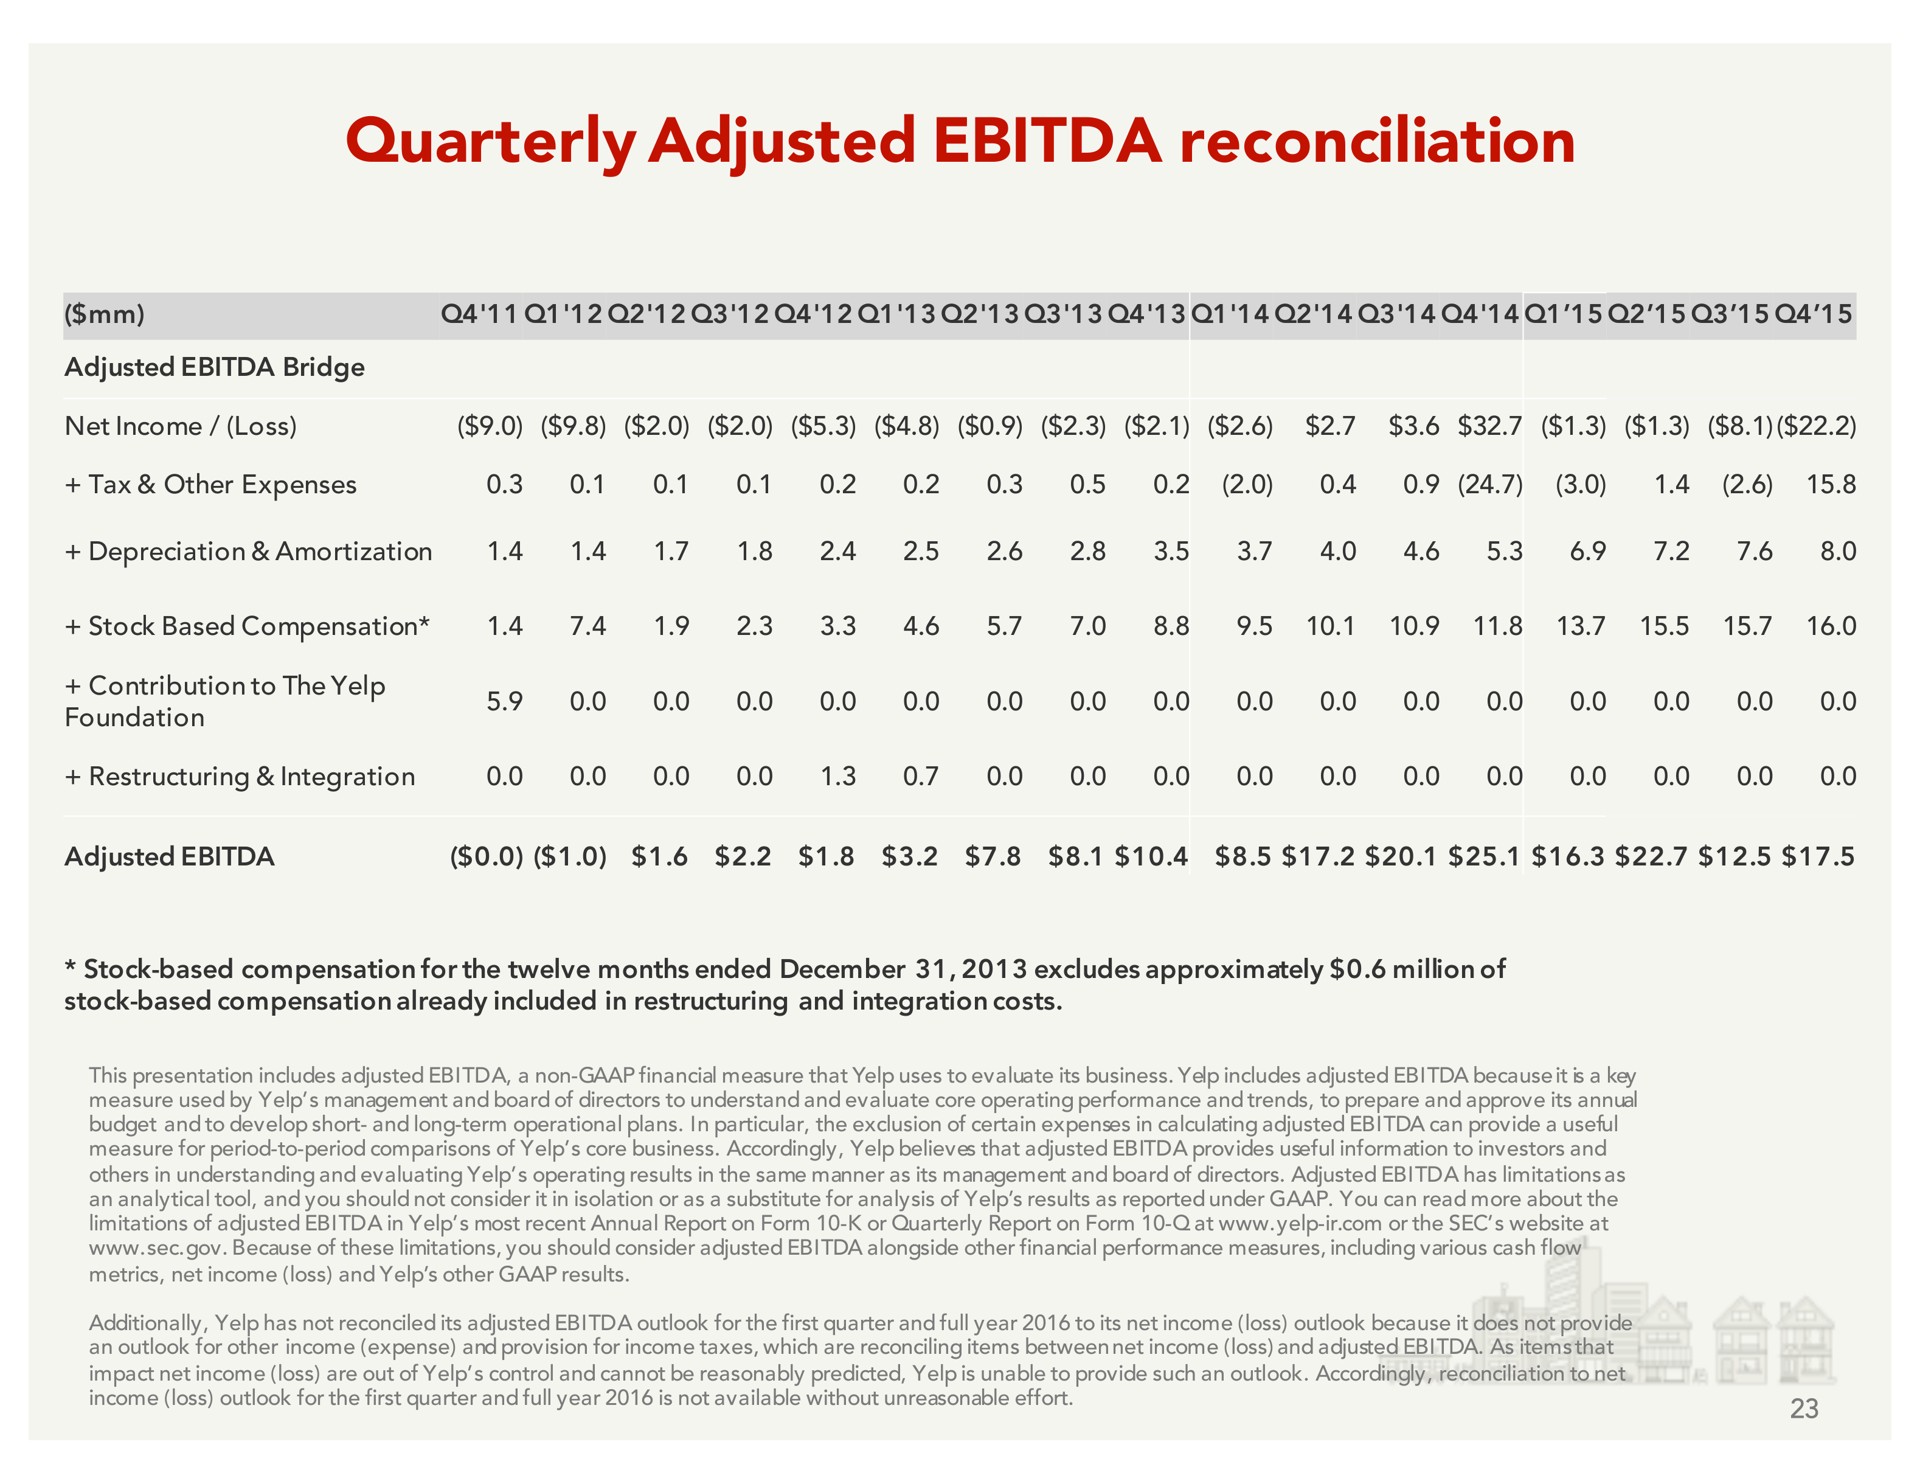 quarterly adjusted reconciliation | Yelp